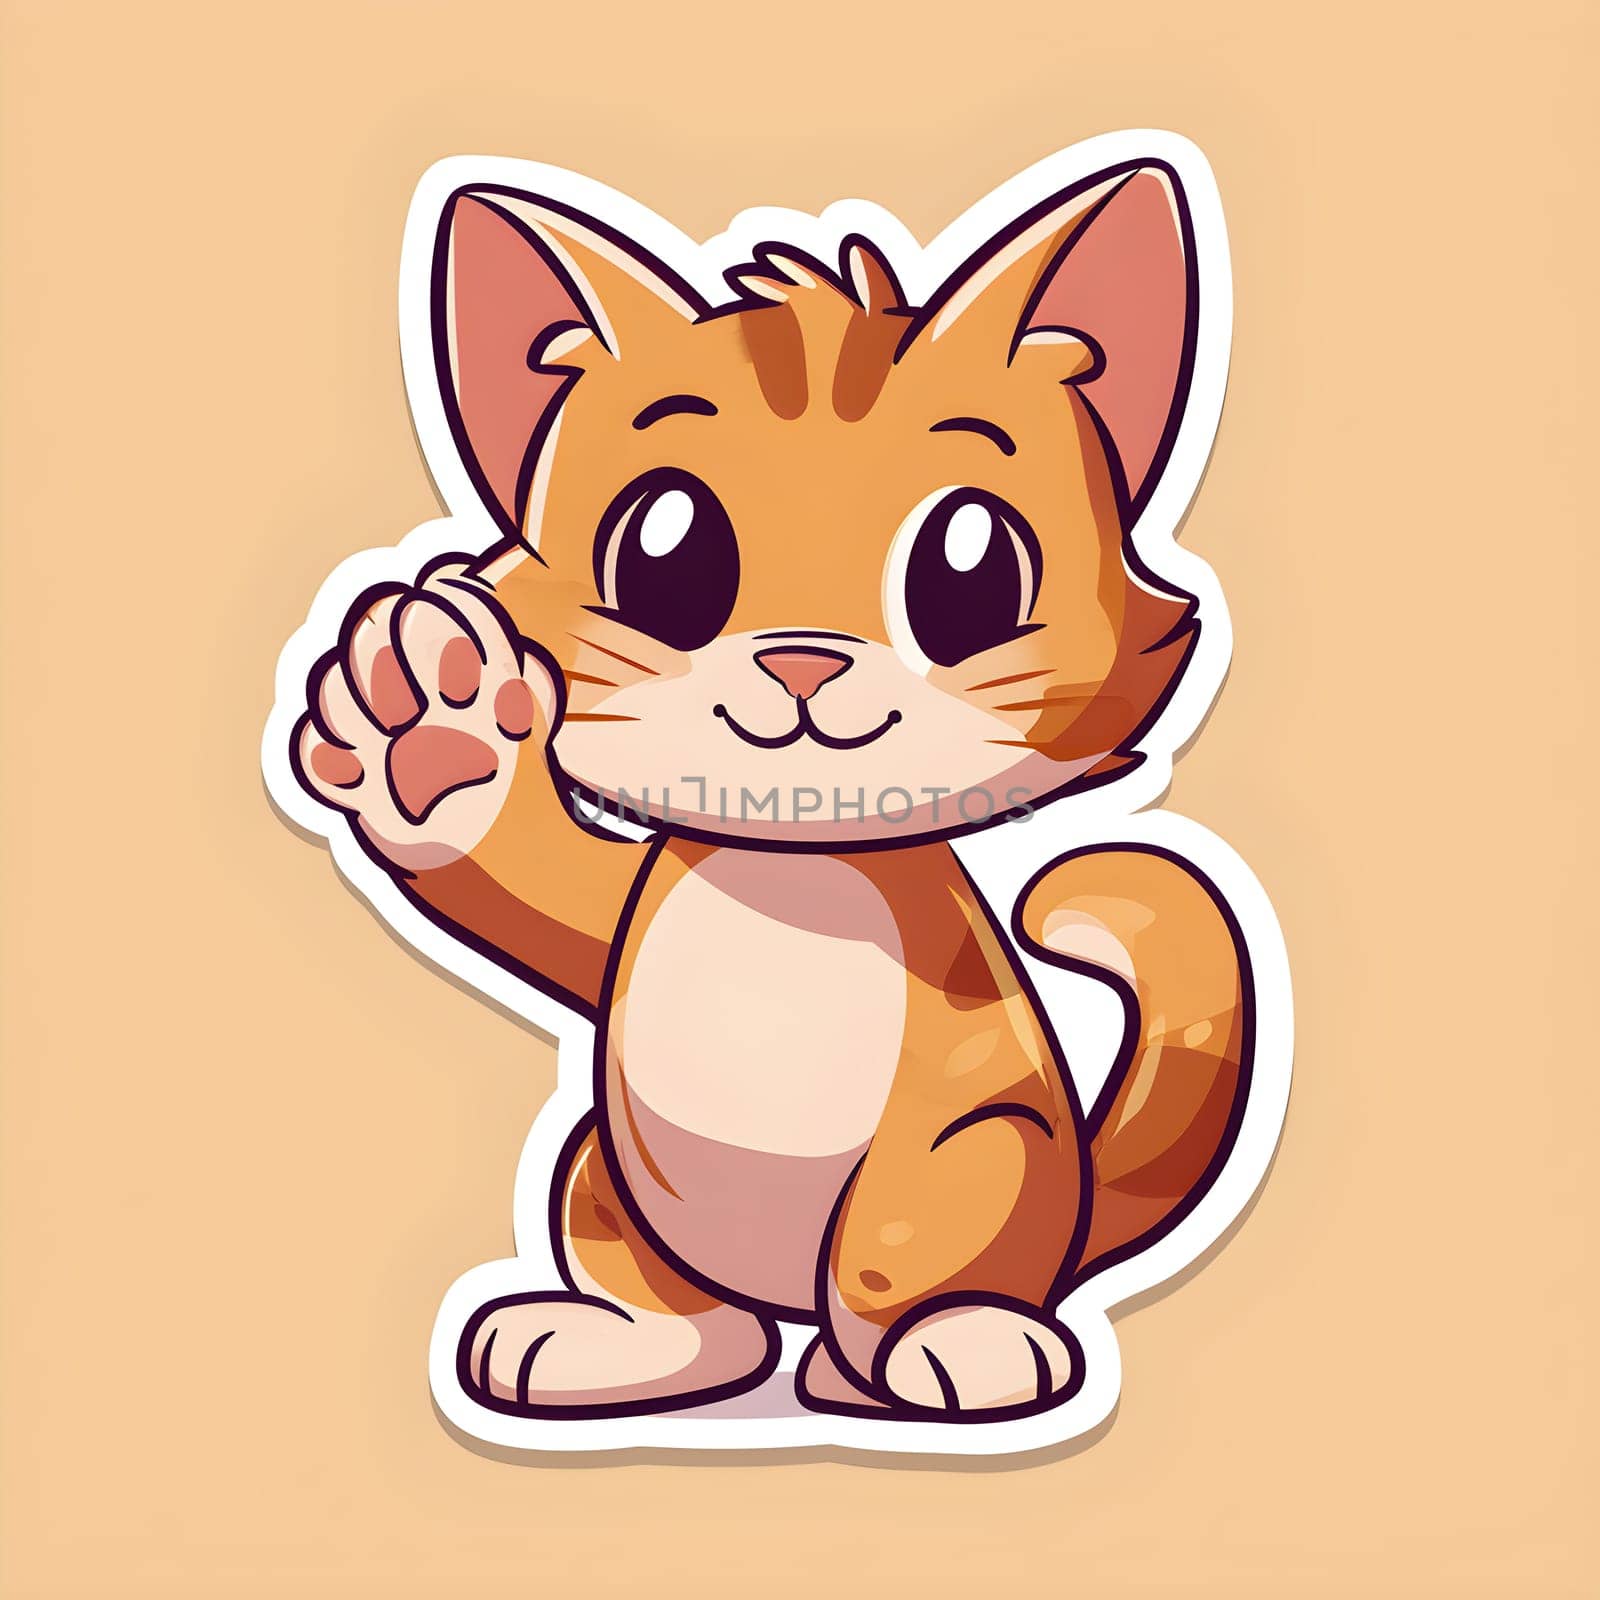 An adorable animated cat character with orange and white fur waves its paw in a friendly greeting, showcasing big, sparkling eyes and a cheerful smile - Generative AI